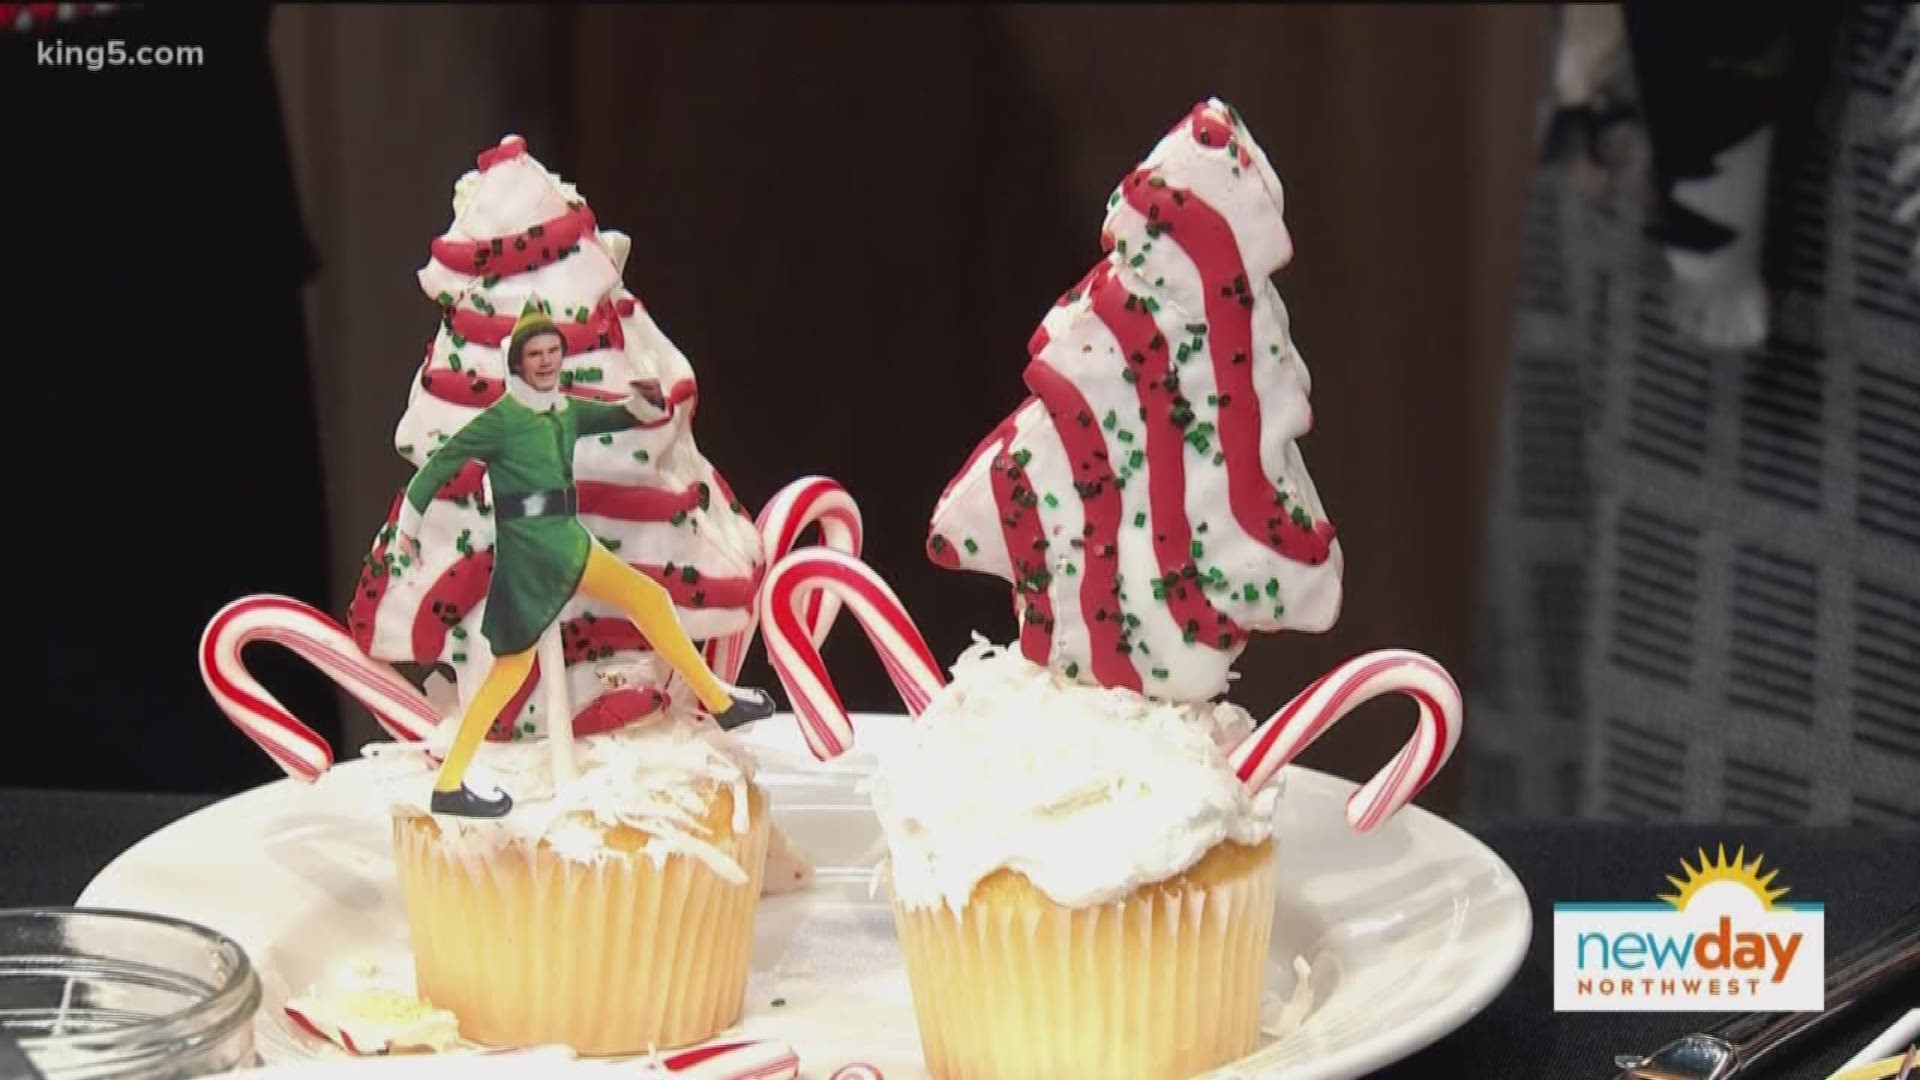 We talk holiday movie-themed goodies.